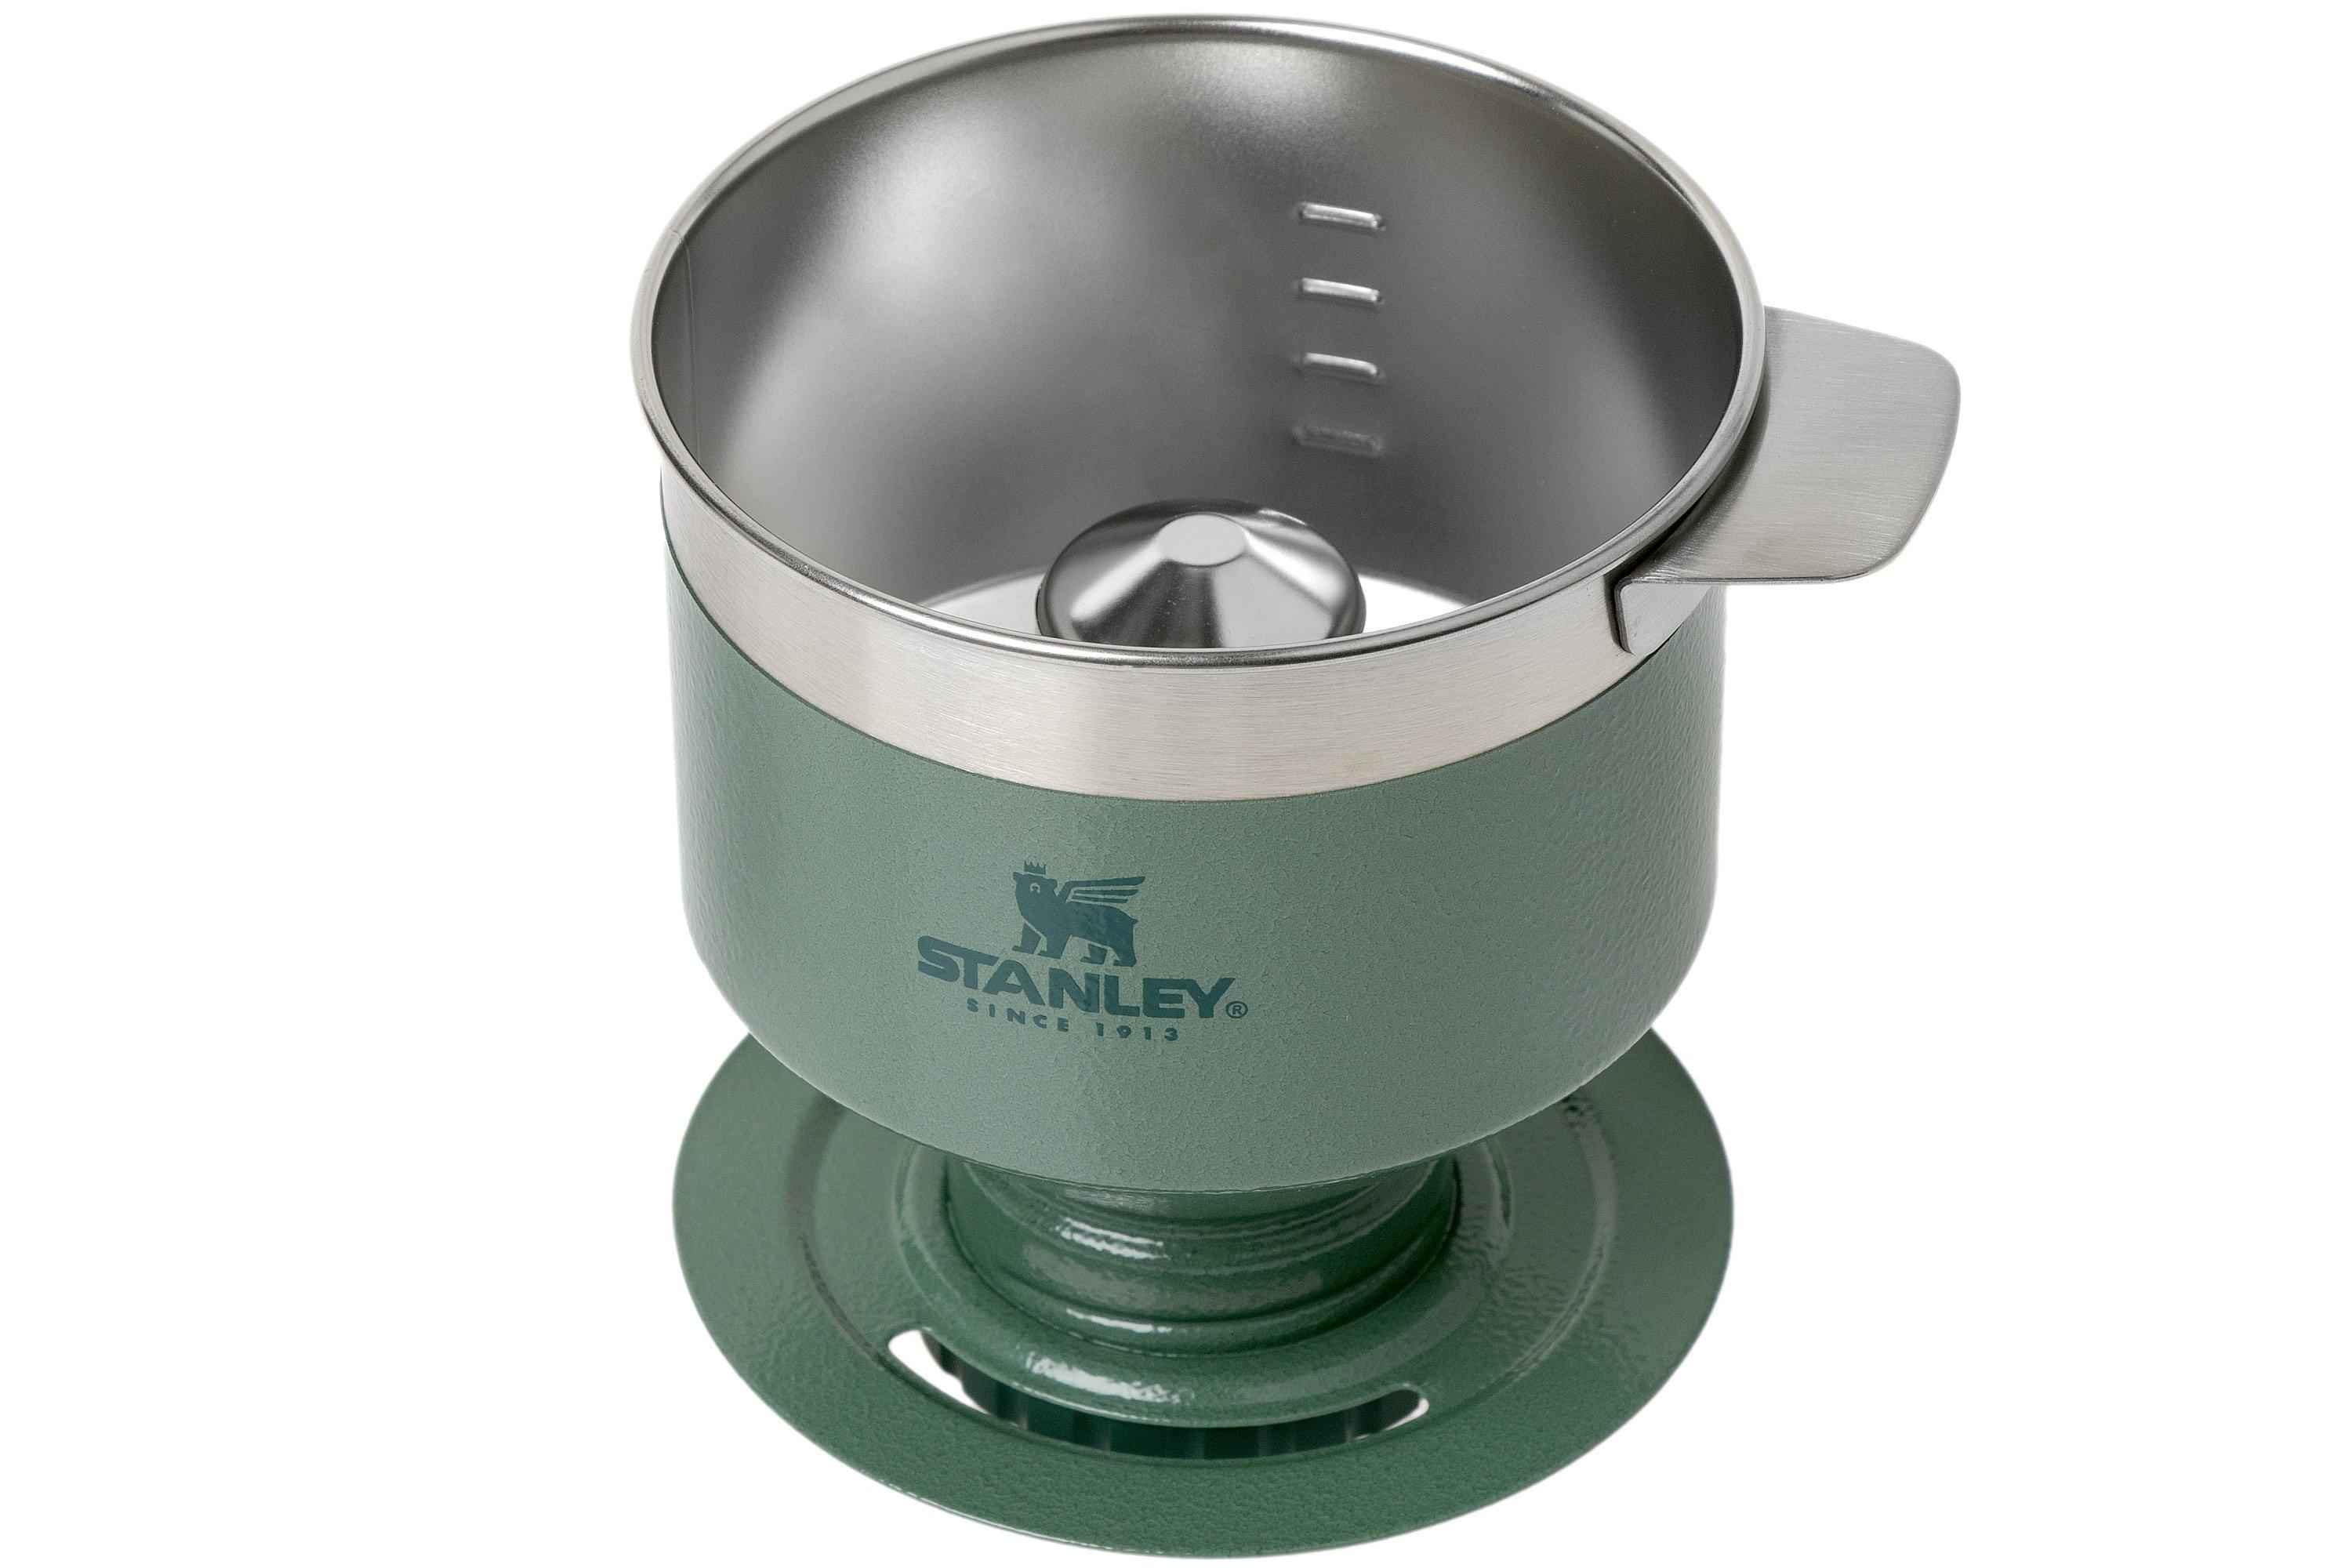 Stanley Camp Pour over Coffee Brewer Set, Includes Legendary Camp